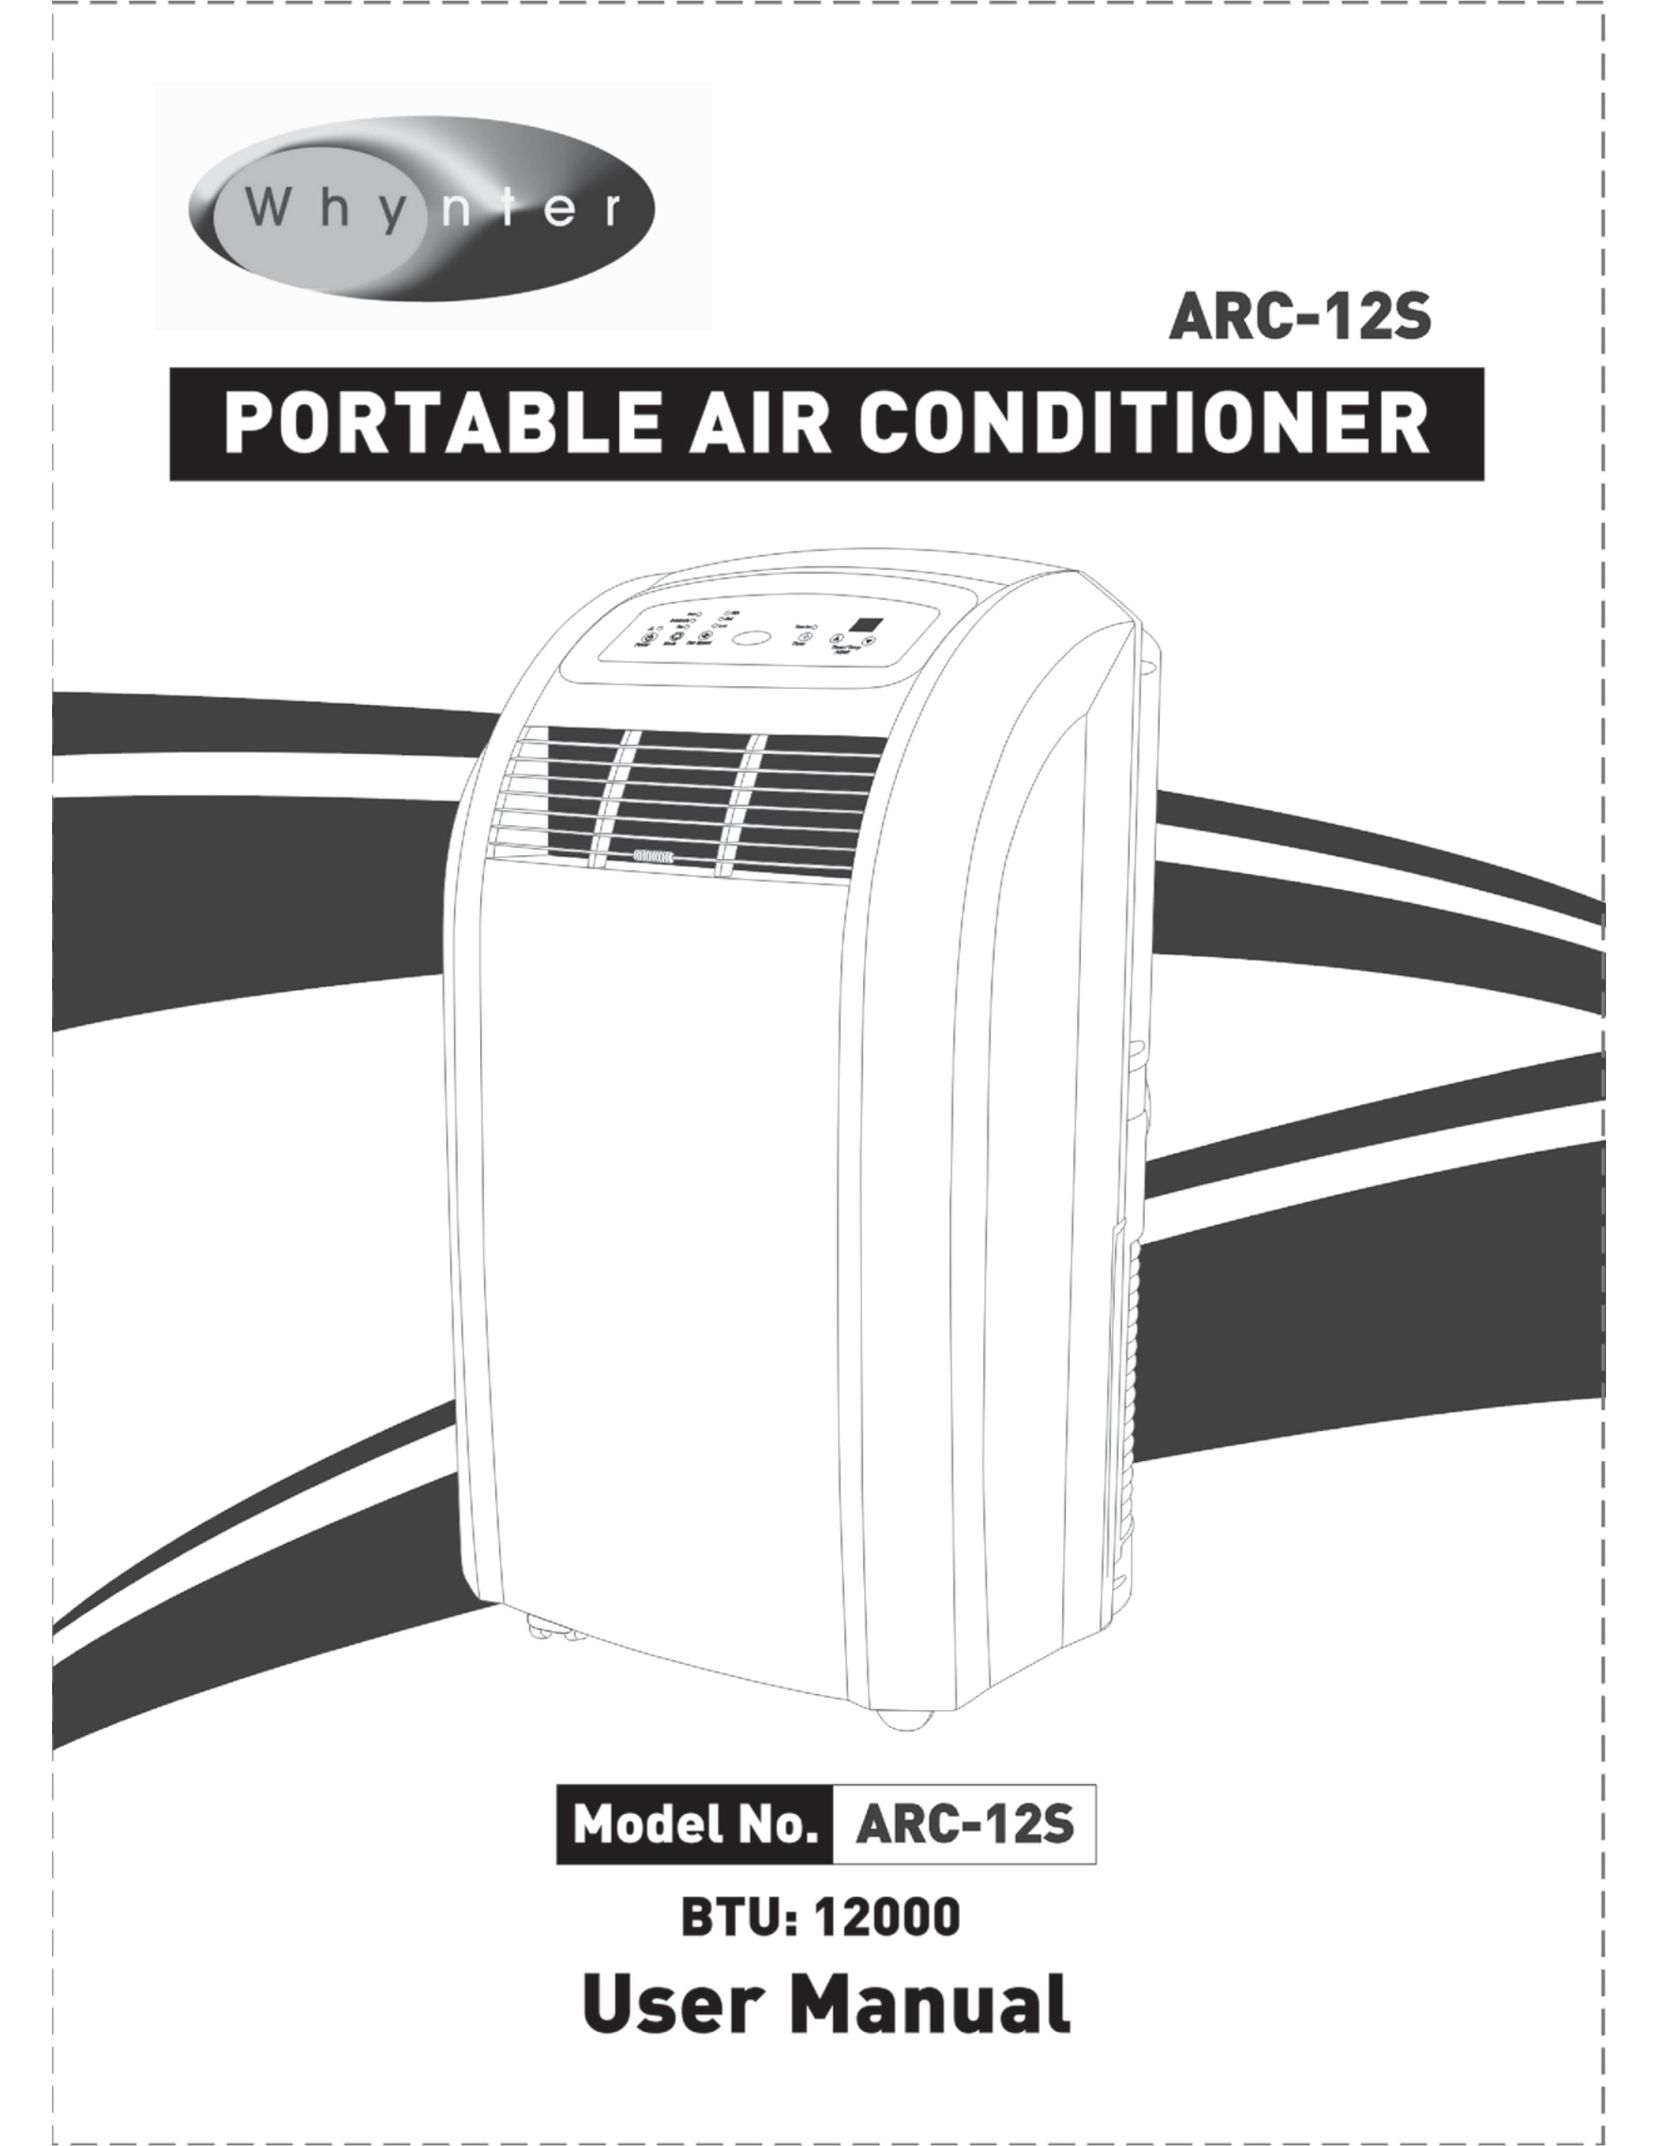 Whynter ARC-12S Air Conditioner User Manual